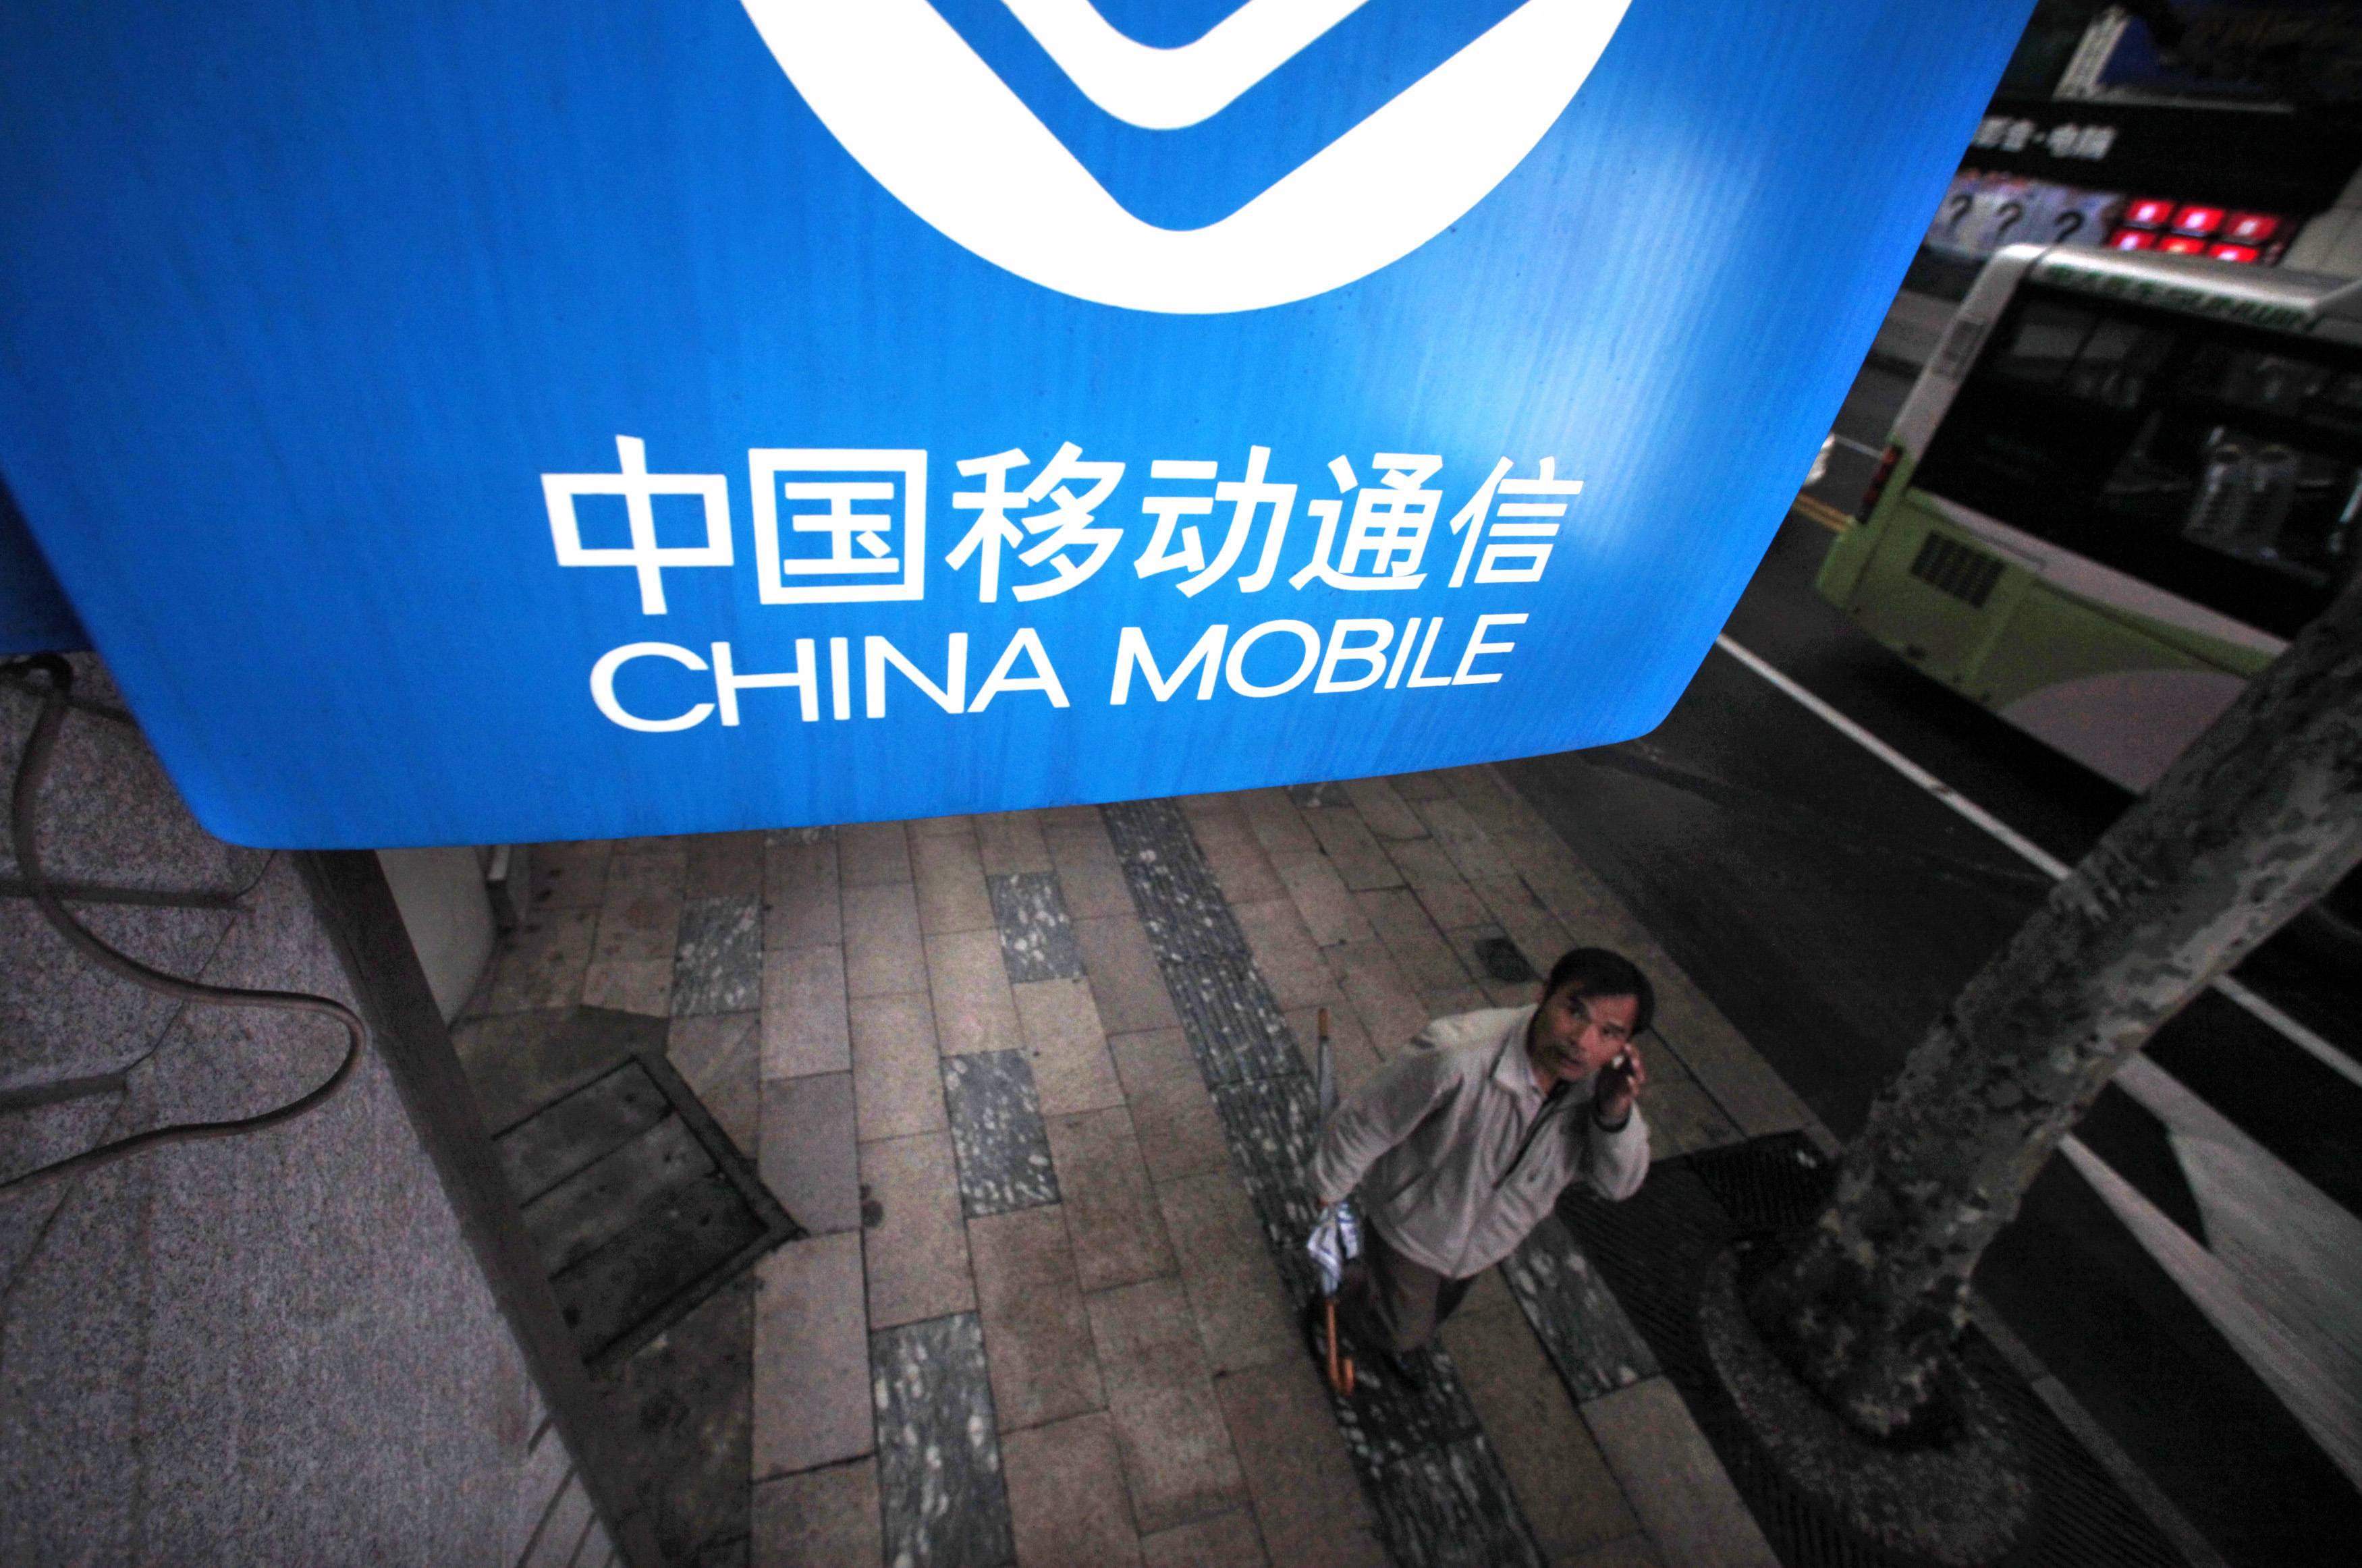 Apple poised to ship iPhones to China Mobile: report